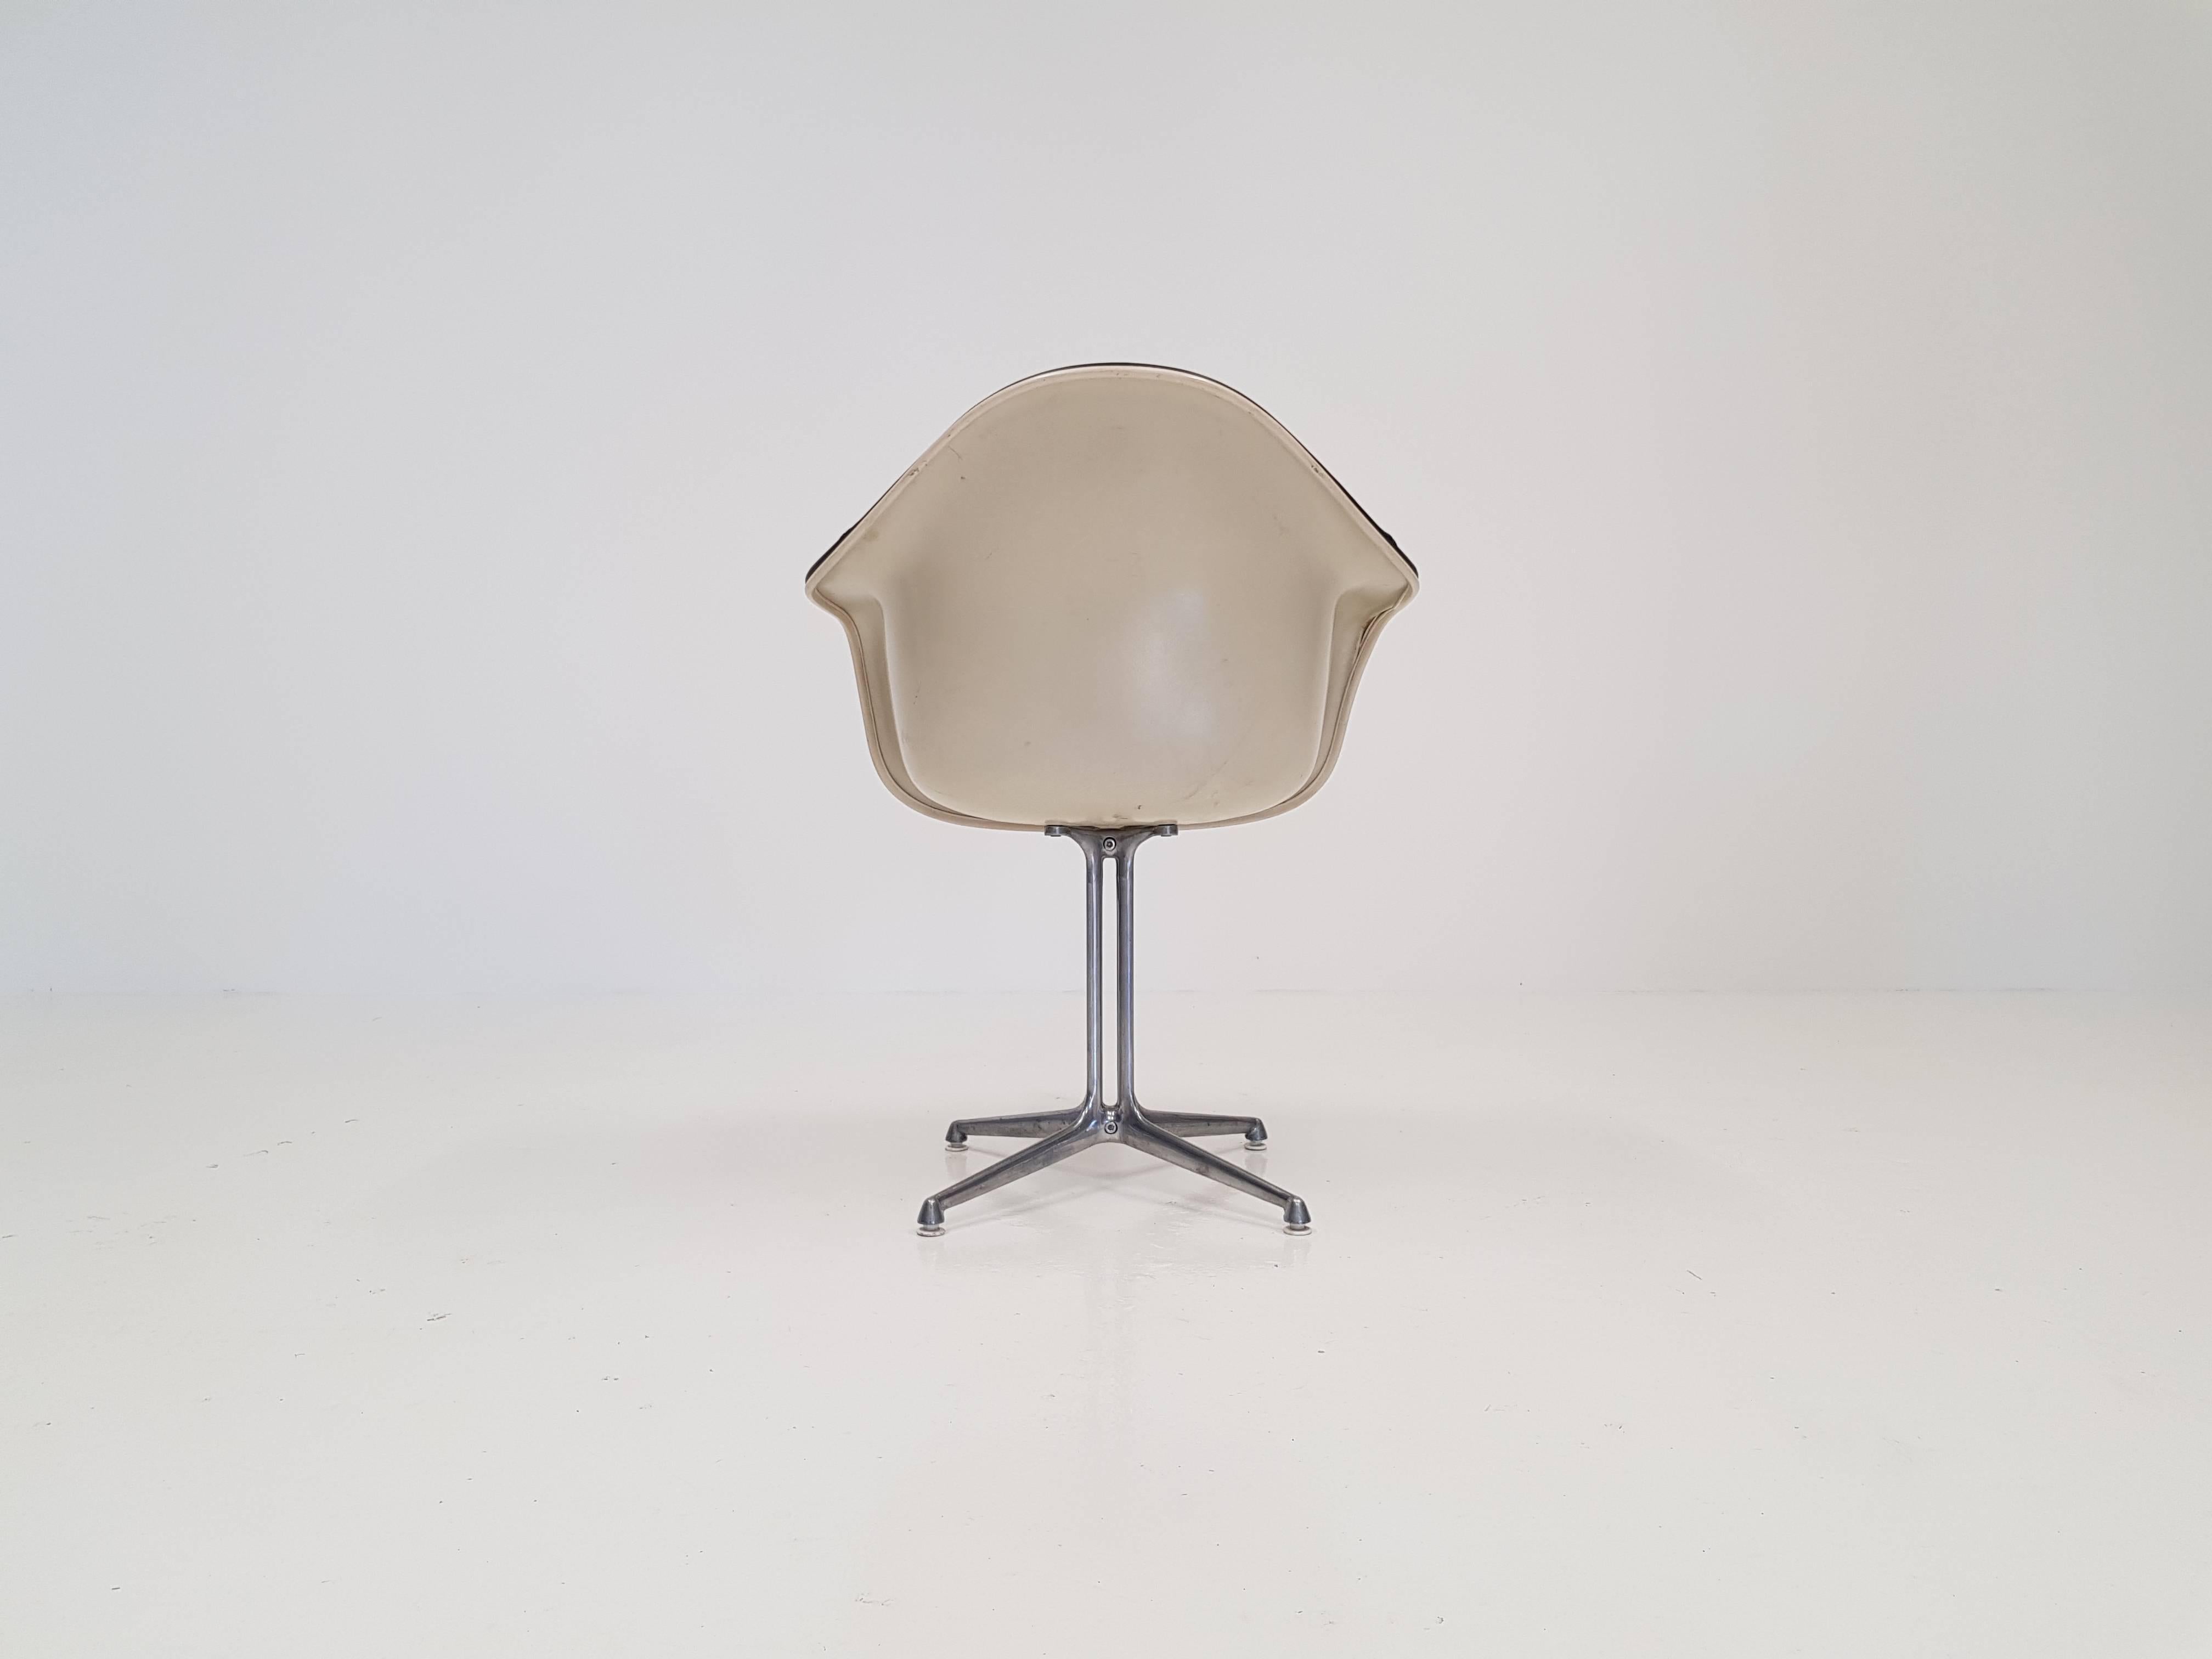 American Charles and Ray Eames 'La Fonda' Chair for Herman Miller